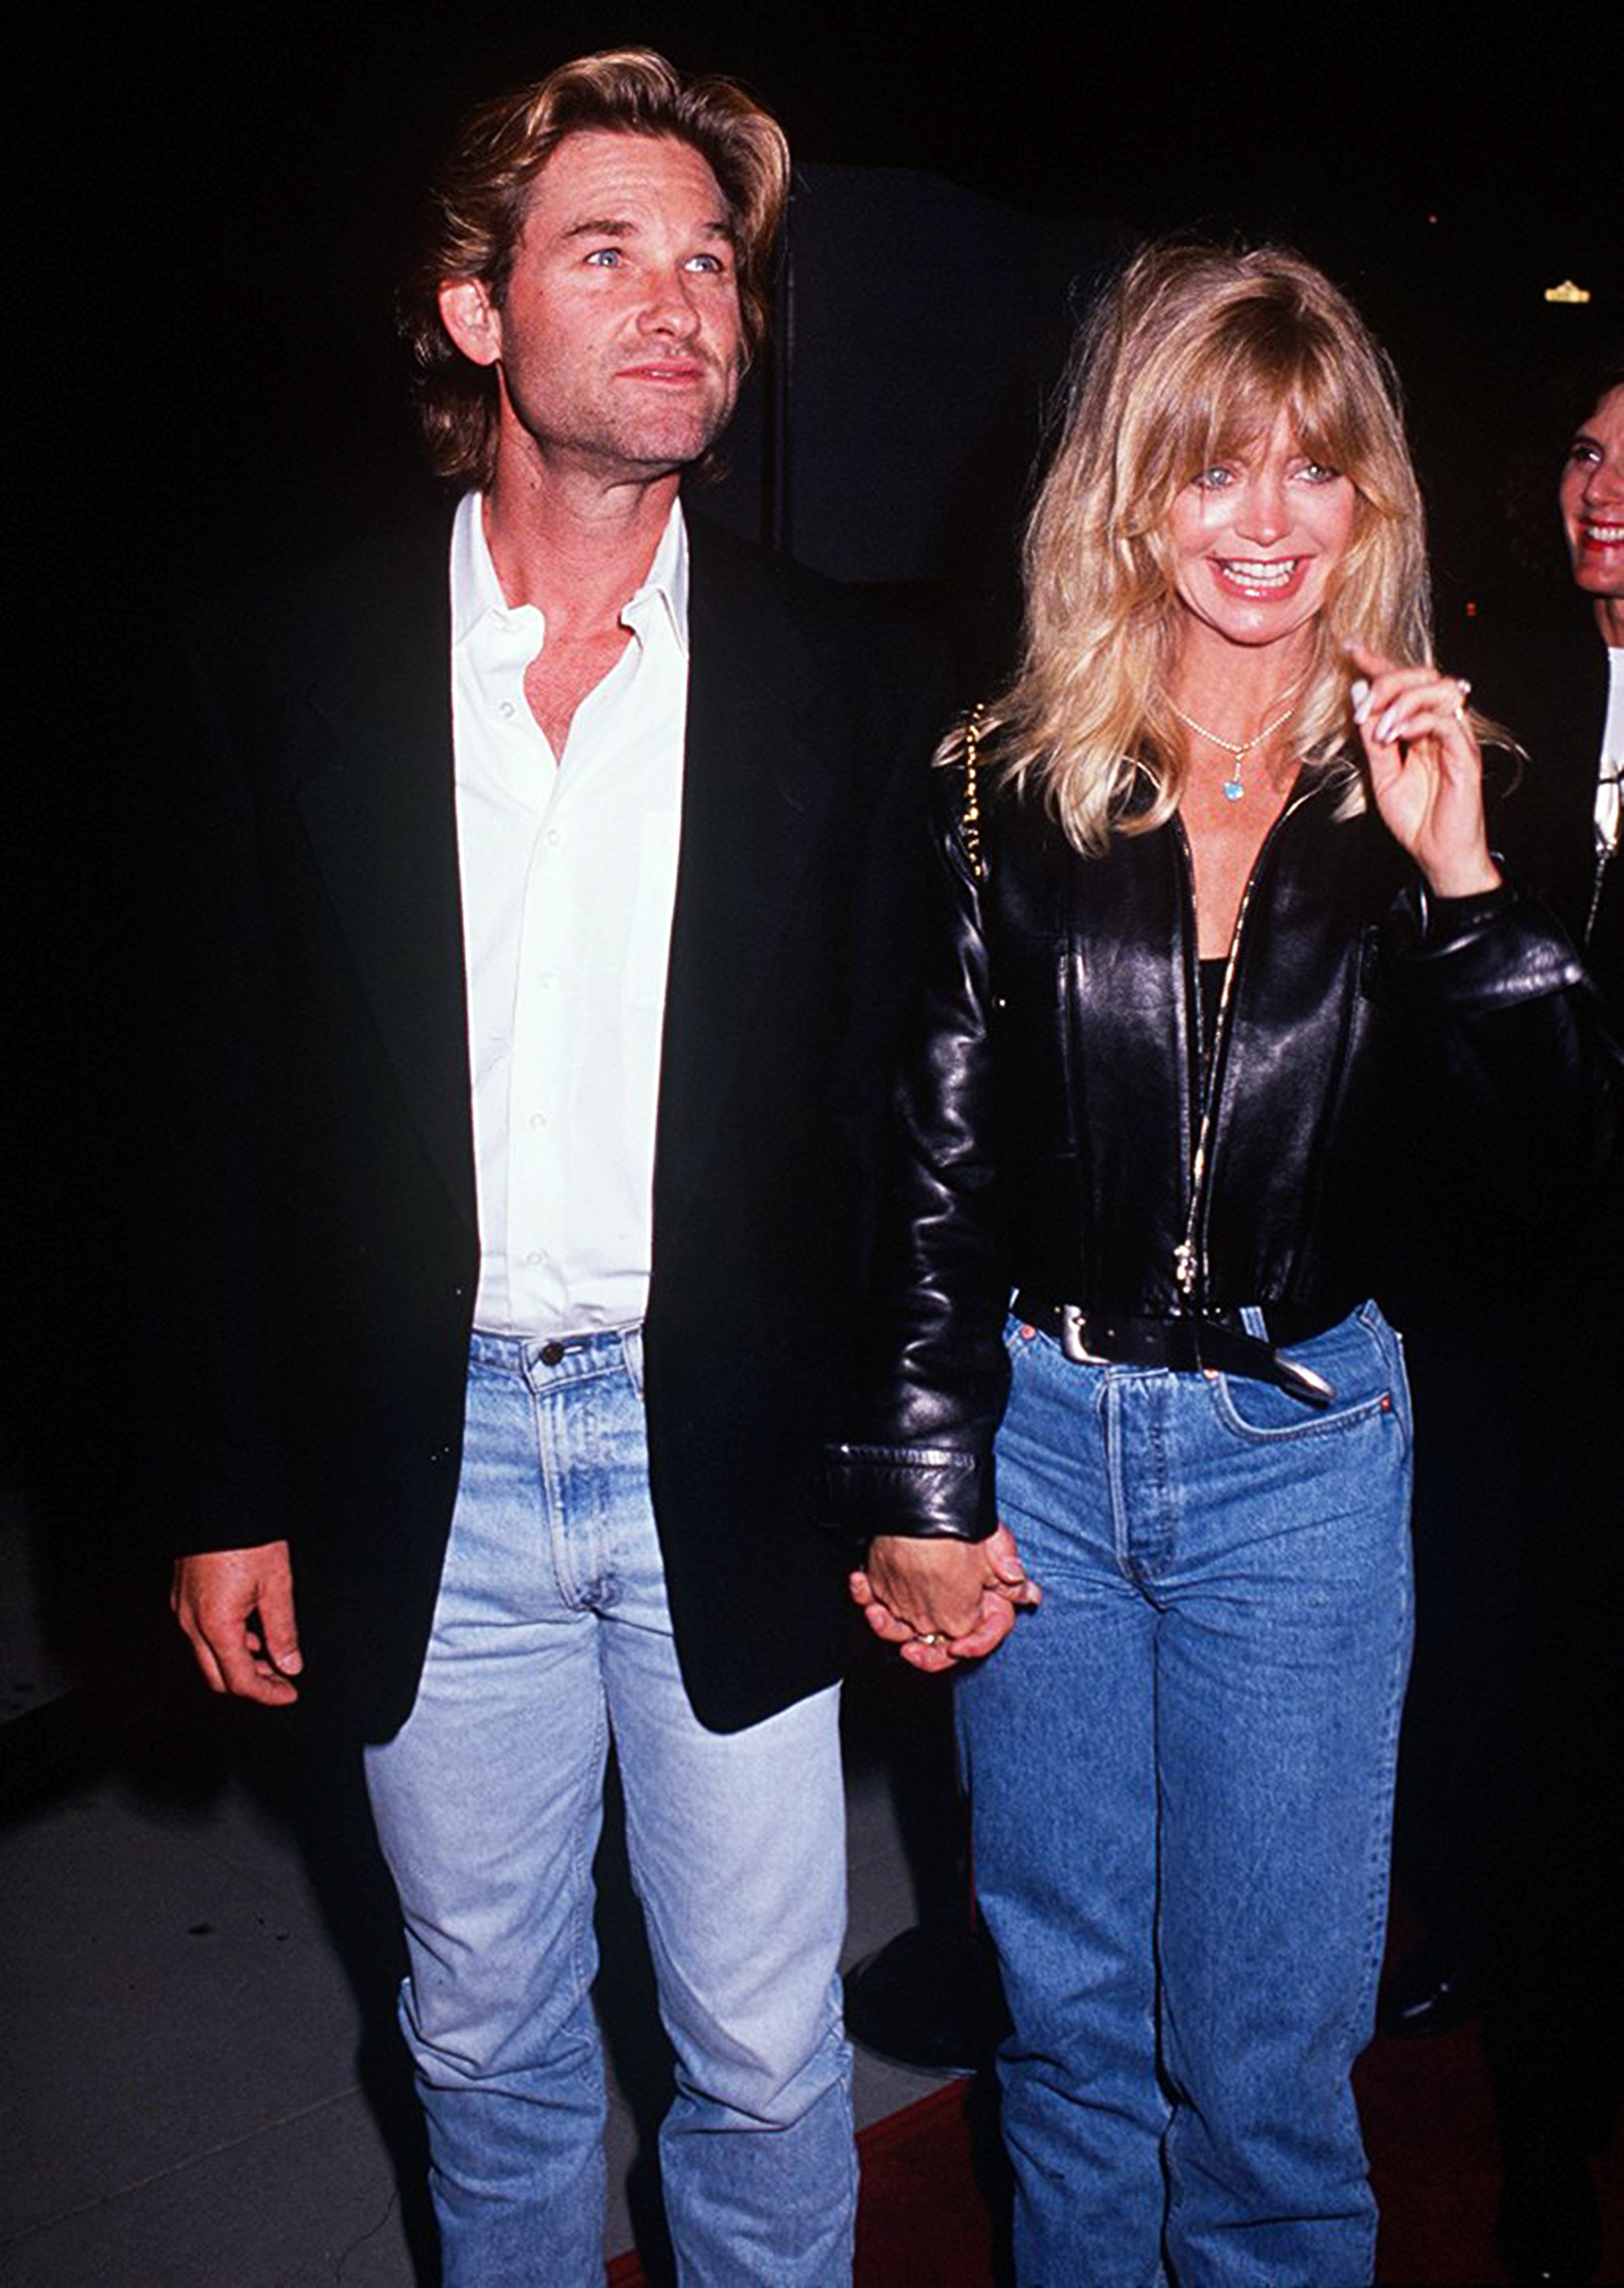 Goldie Hawn with her partner, actor Kurt Russell at the 'Housesitter' Beverly Hills premiere on June 9, 1992, at the Academy Theatre in Beverly Hills, California. | Source: Getty Images.